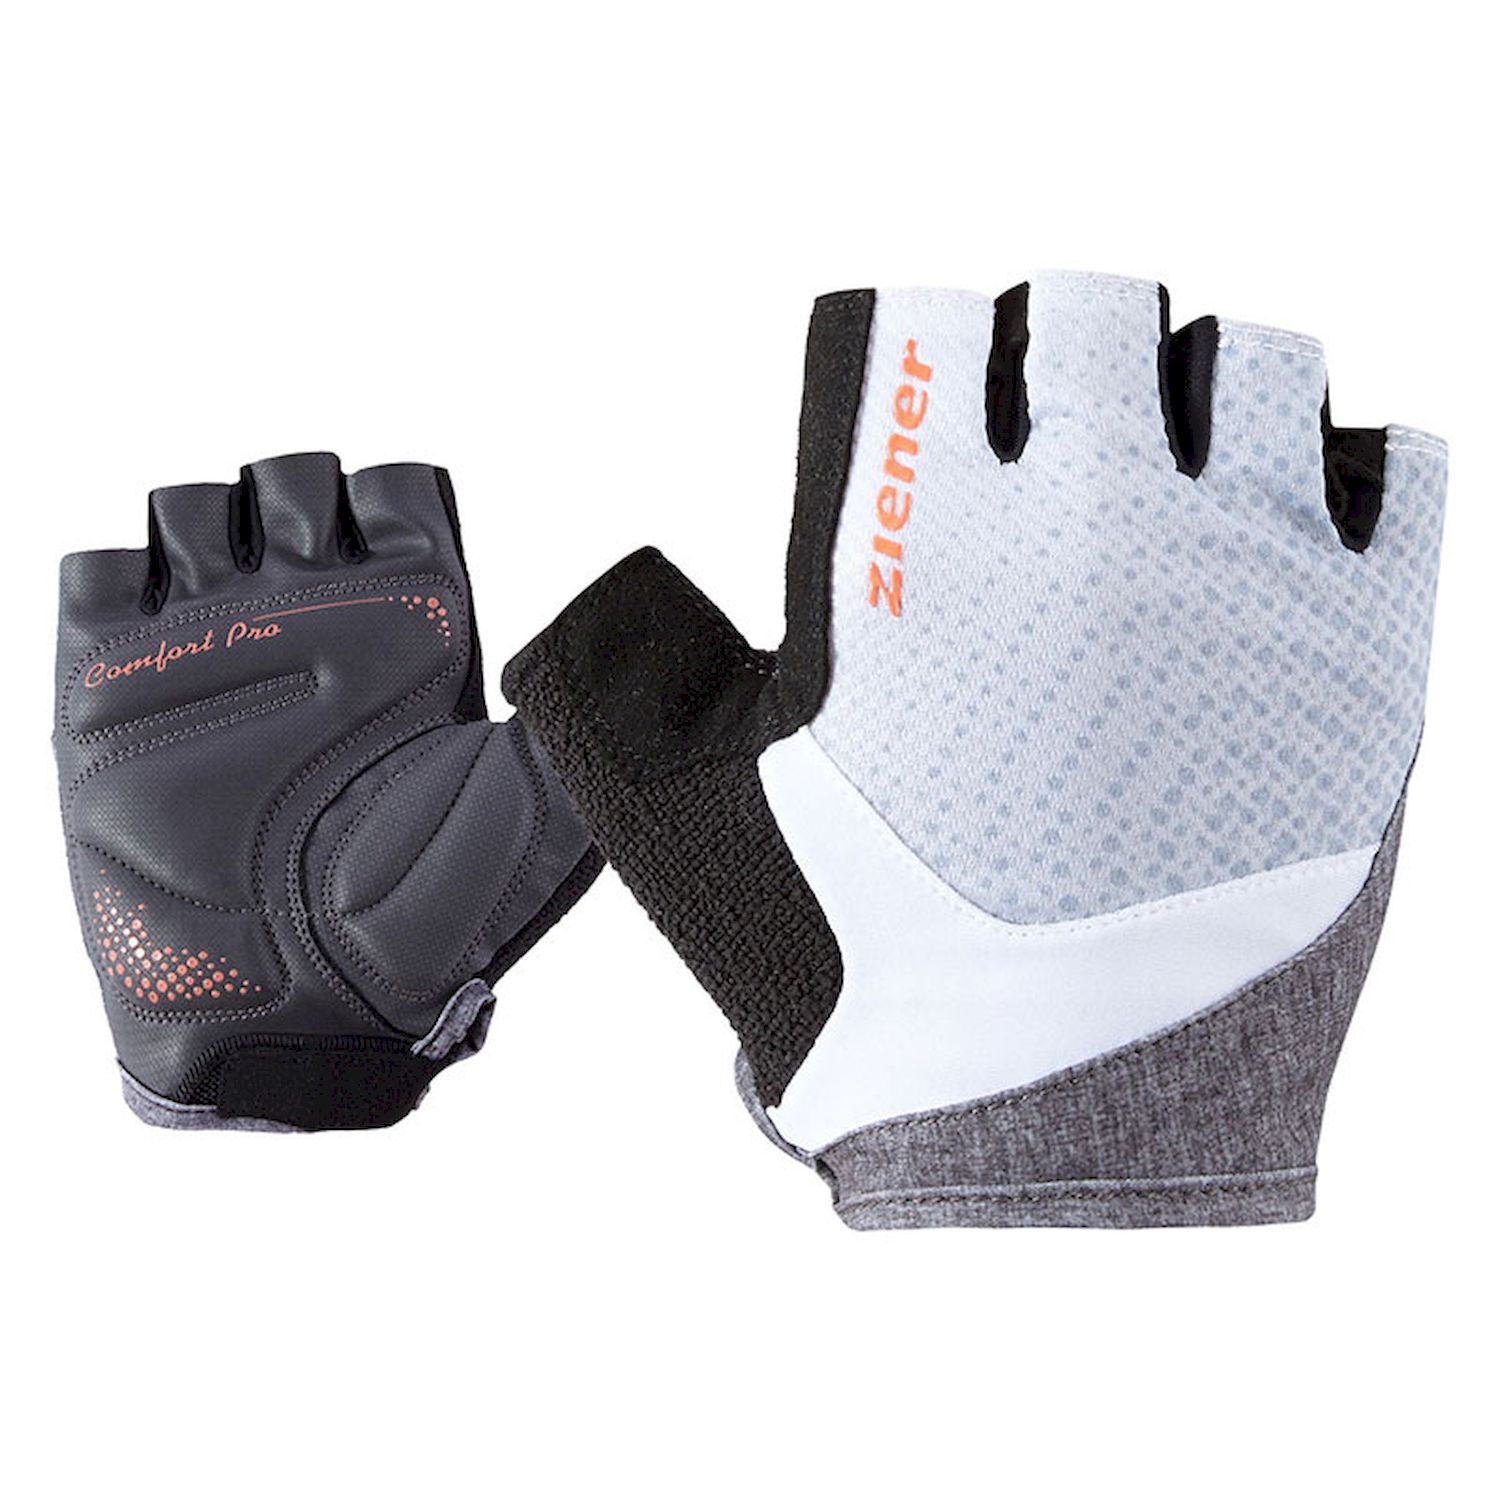 Ziener Cendal Lady - Guantes ciclismo - Mujer